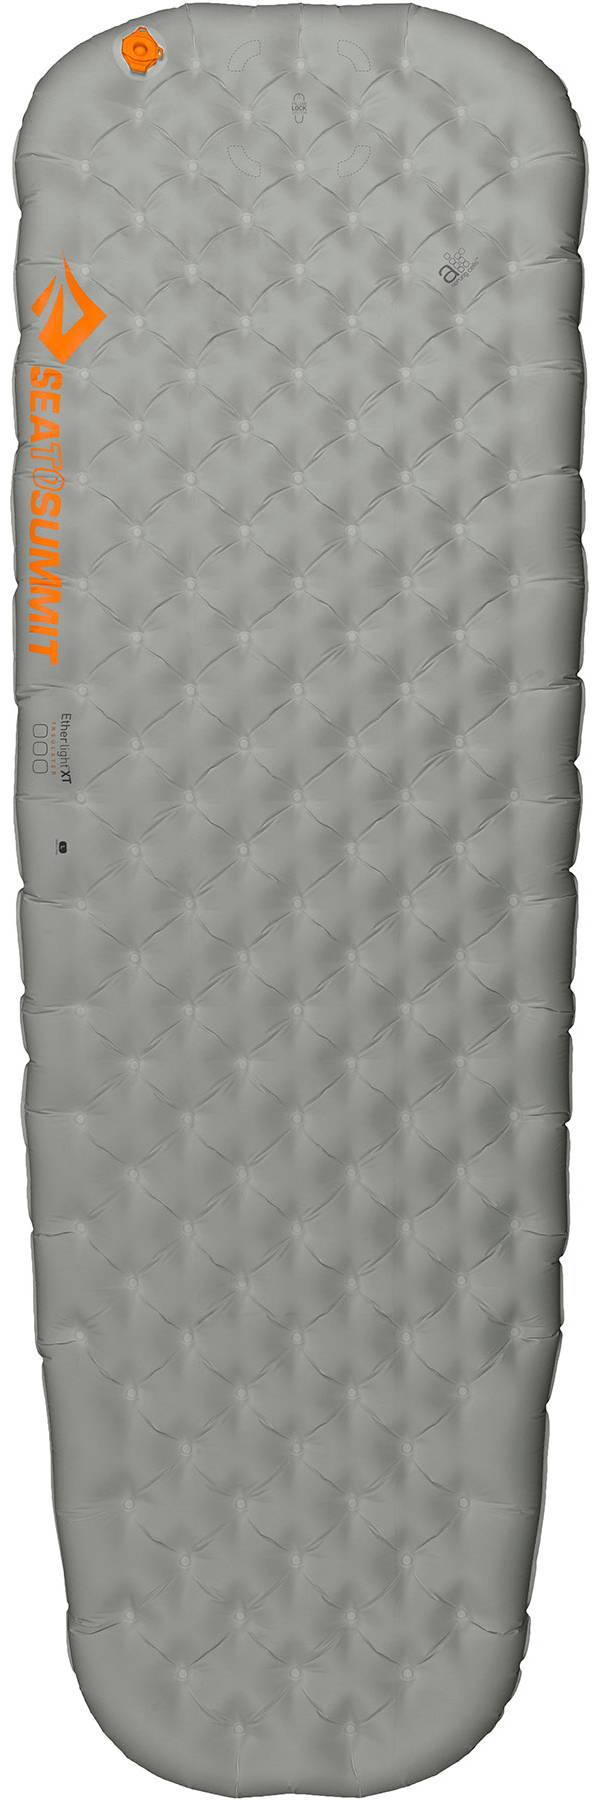 Sea To Summit Large Ether Light XT Insulated Air Sleeping Mat product image